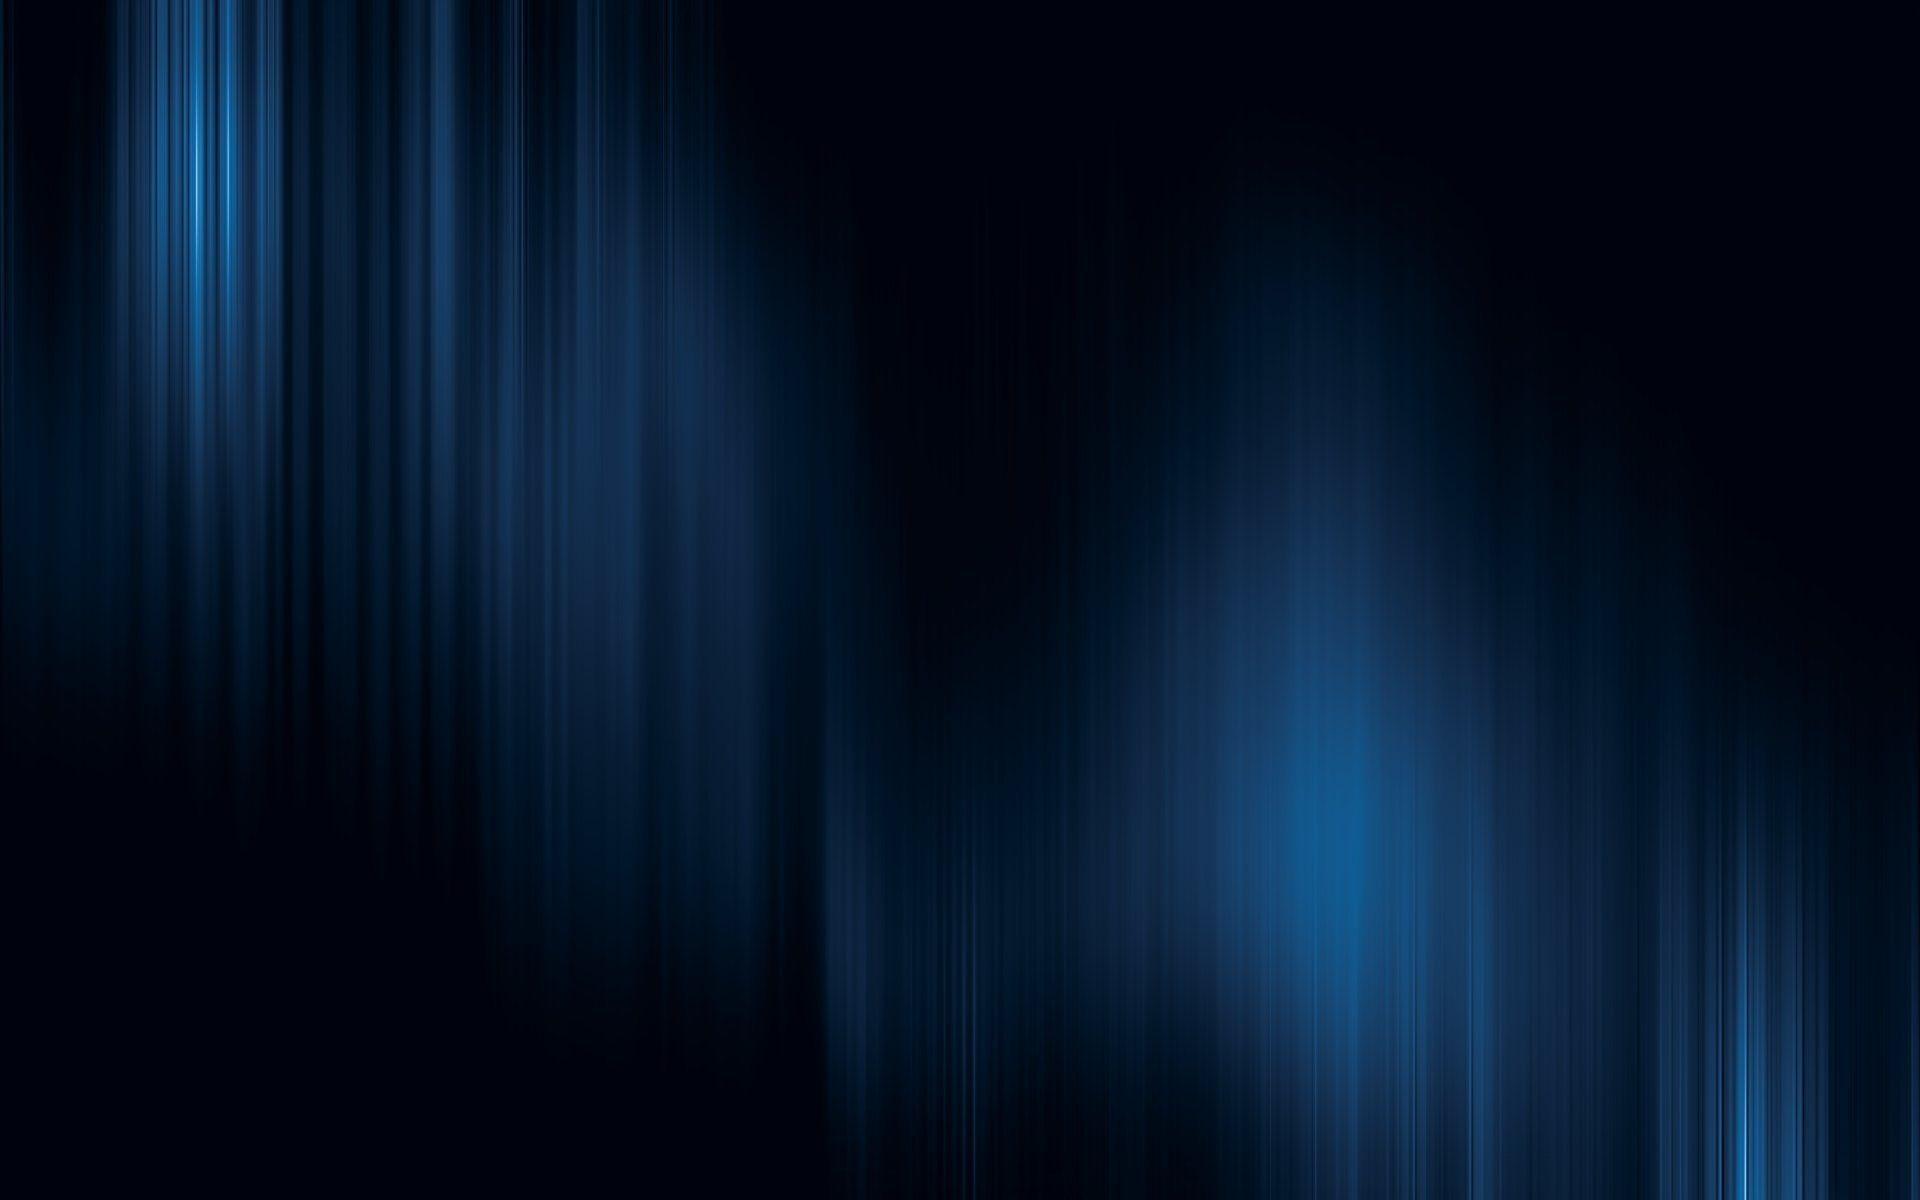 Cool Black And Blue Background Designs. Free Design